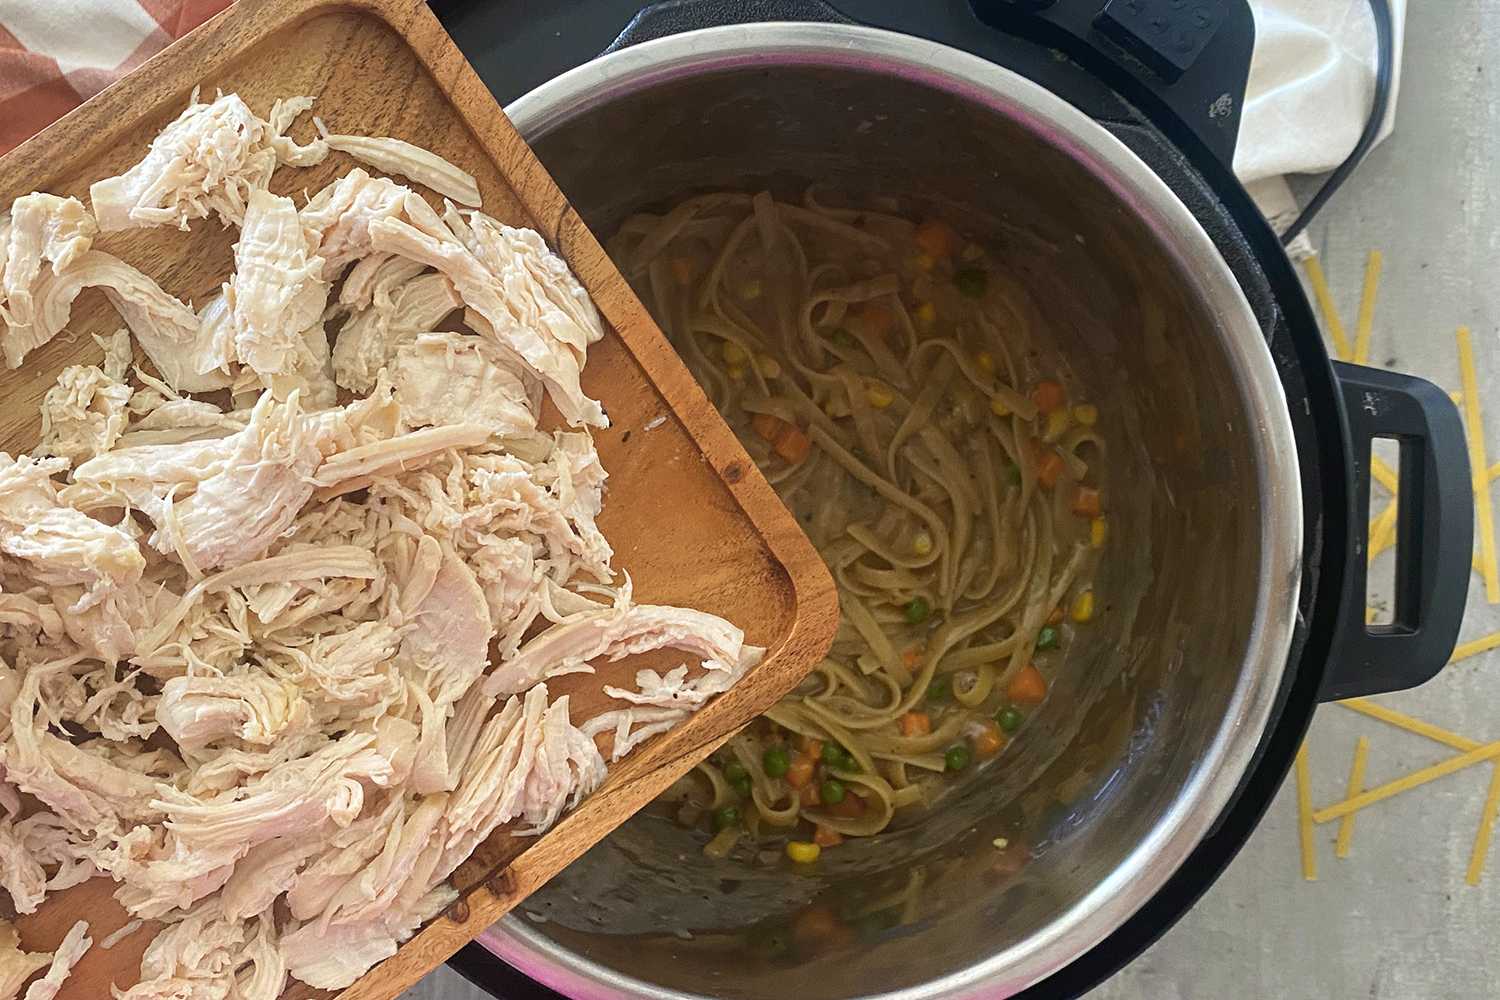 Instant Pot Chicken and Noodles